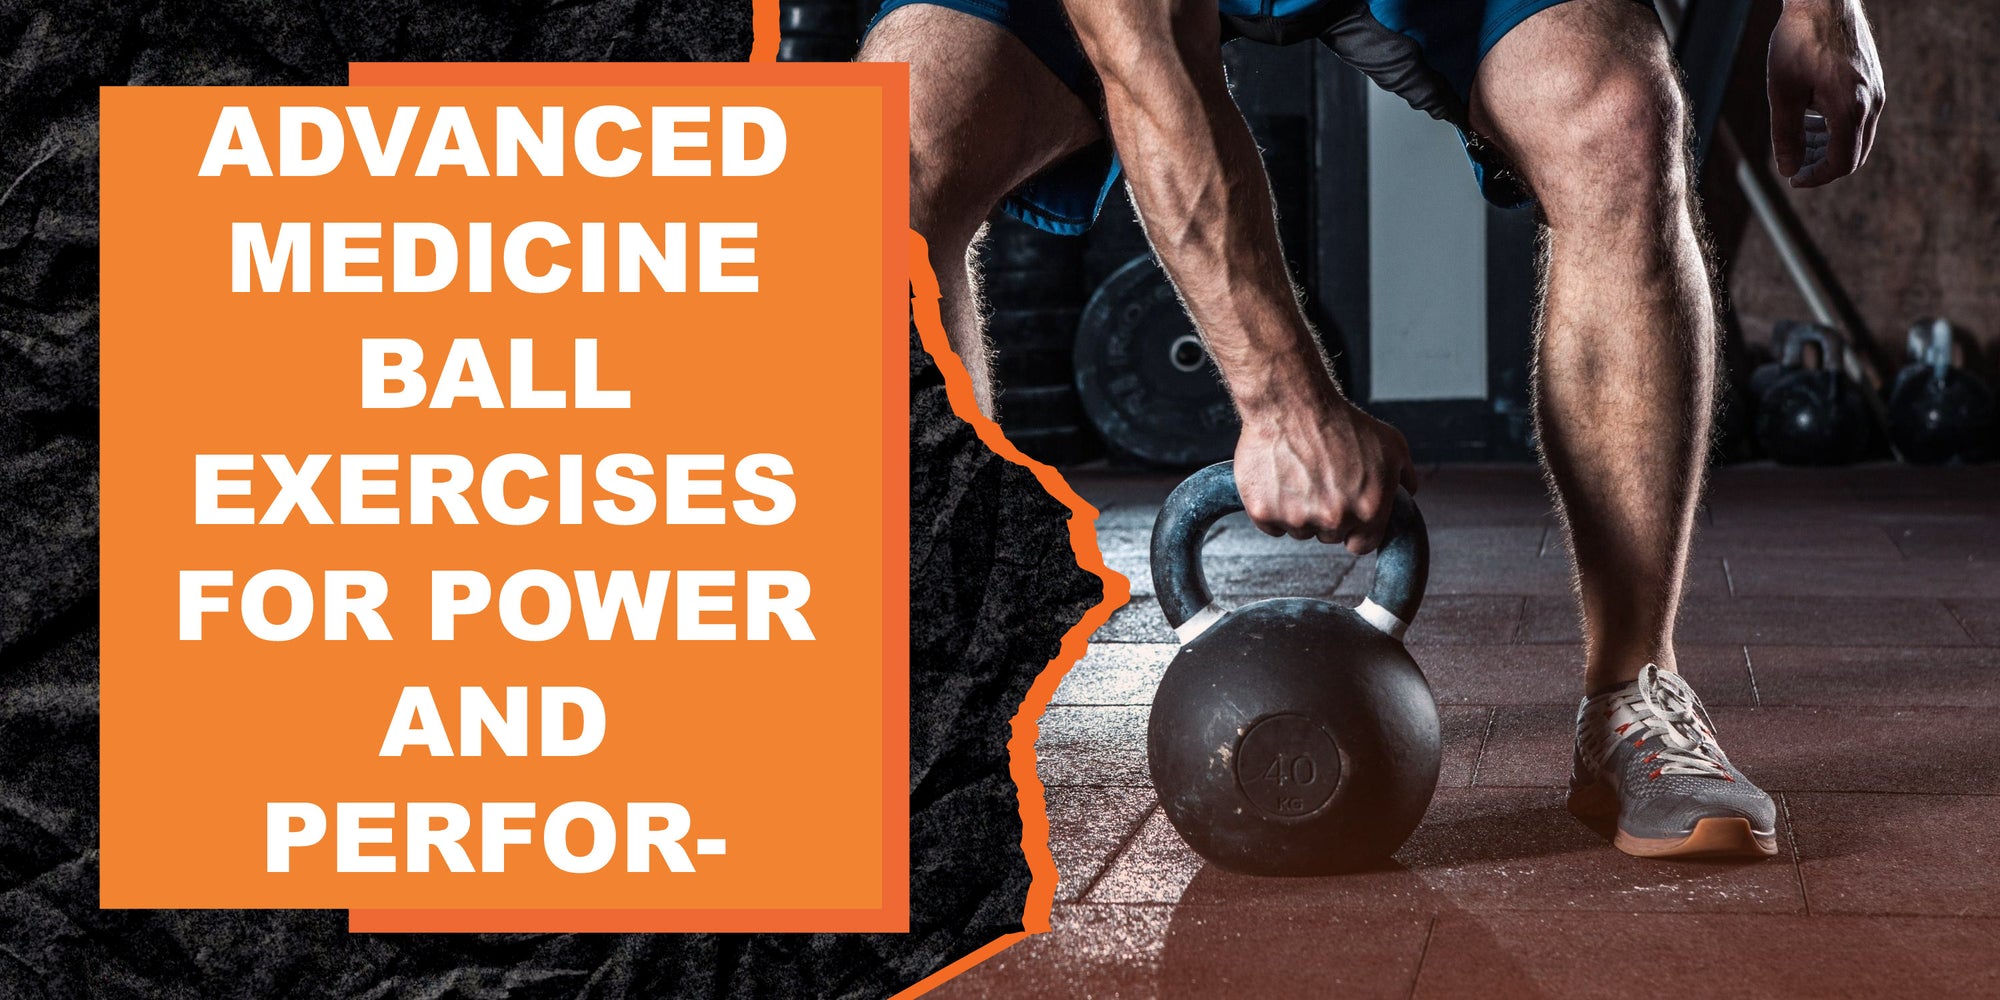 Advanced Medicine Ball Exercises for Power and Performance